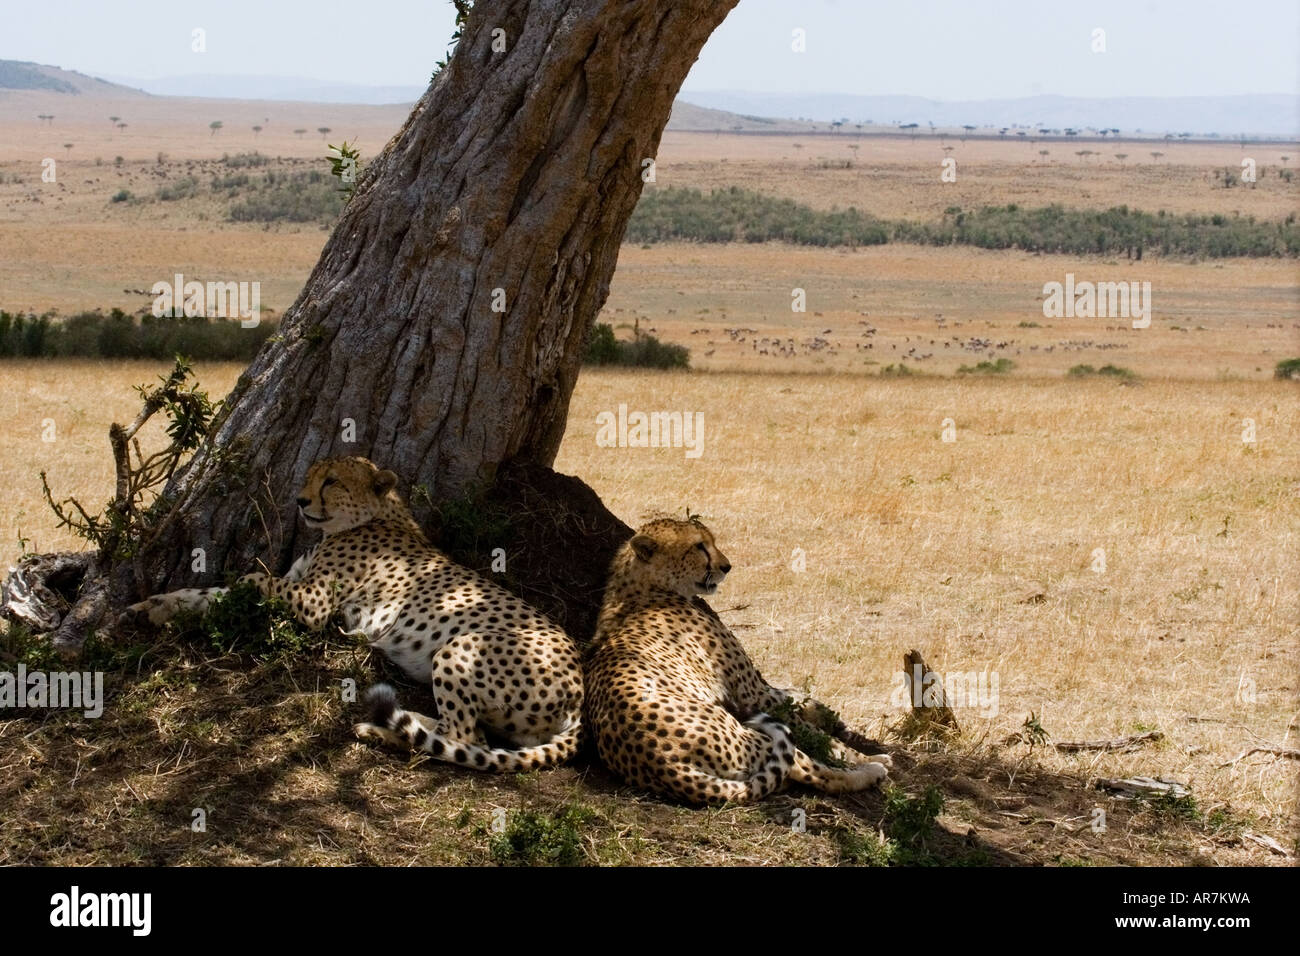 Landscape in the Maasai Mara, Kenya, with two cheetahs resting in the shade of an acacia tree in the heat of the day Stock Photo